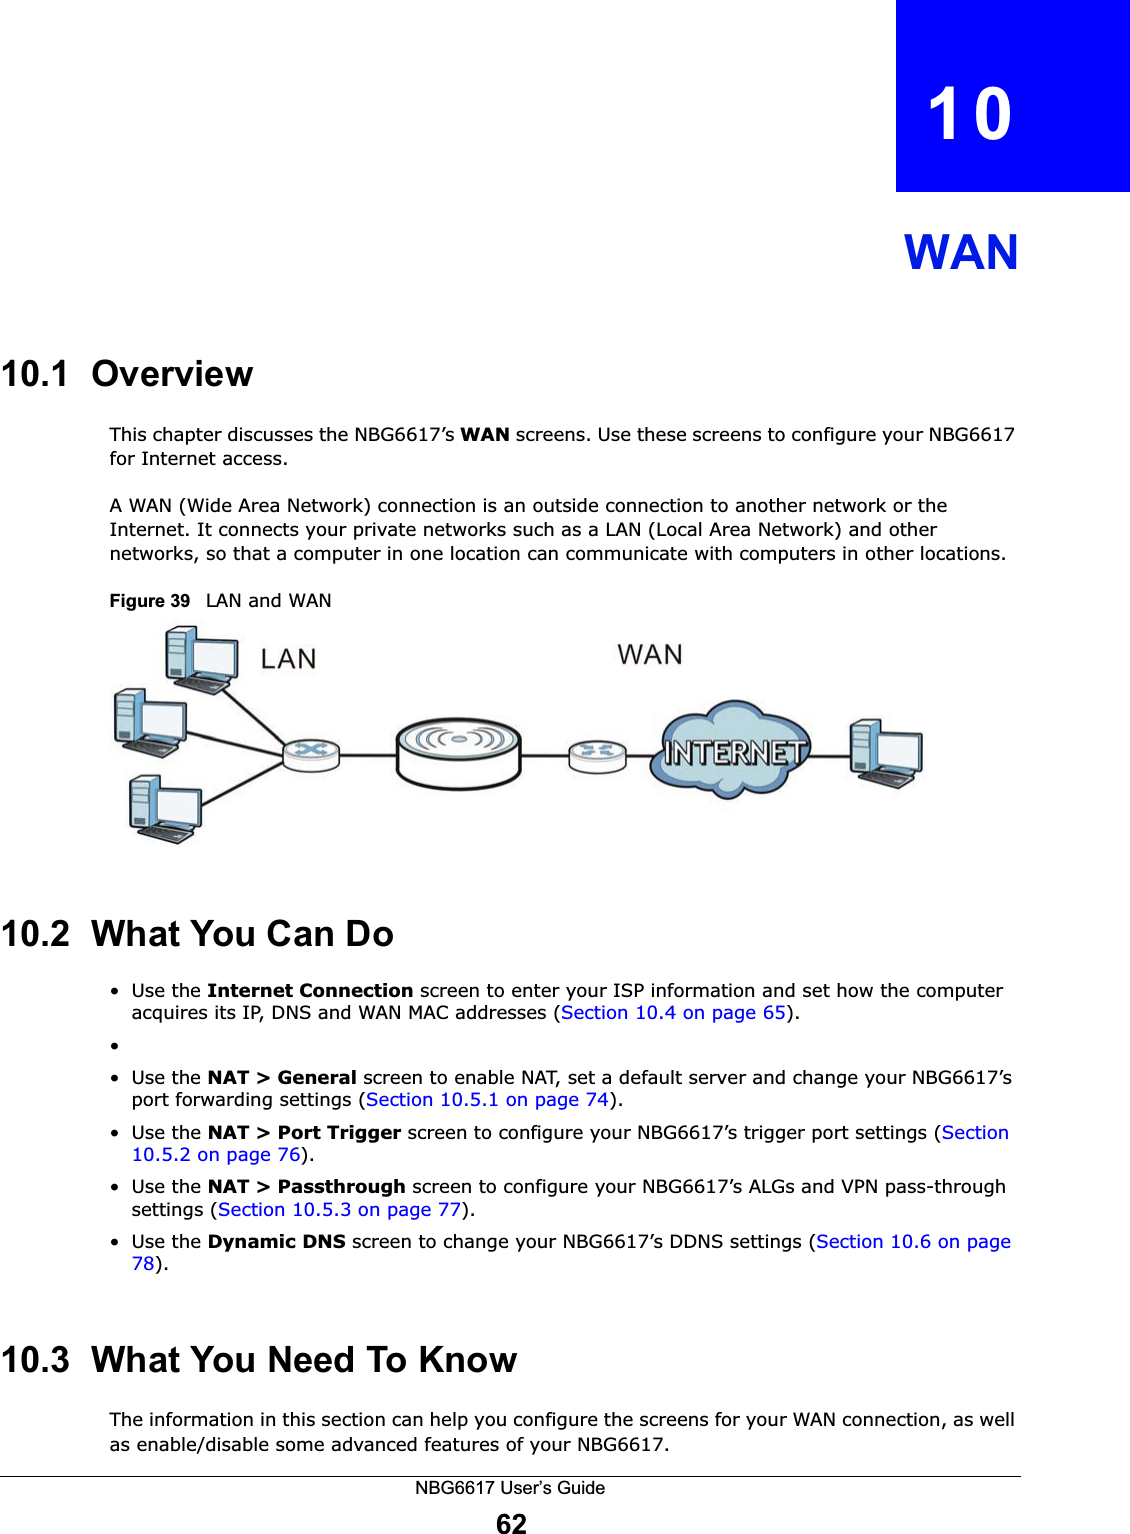 NBG6617 User’s Guide62CHAPTER   10WAN10.1  OverviewThis chapter discusses the NBG6617’s WAN screens. Use these screens to configure your NBG6617 for Internet access.A WAN (Wide Area Network) connection is an outside connection to another network or the Internet. It connects your private networks such as a LAN (Local Area Network) and other networks, so that a computer in one location can communicate with computers in other locations.Figure 39   LAN and WAN10.2  What You Can Do•Use the Internet Connection screen to enter your ISP information and set how the computer acquires its IP, DNS and WAN MAC addresses (Section 10.4 on page 65).••Use the NAT &gt; General screen to enable NAT, set a default server and change your NBG6617’s port forwarding settings (Section 10.5.1 on page 74).•Use the NAT &gt; Port Trigger screen to configure your NBG6617’s trigger port settings (Section 10.5.2 on page 76).•Use the NAT &gt; Passthrough screen to configure your NBG6617’s ALGs and VPN pass-through settings (Section 10.5.3 on page 77).•Use the Dynamic DNS screen to change your NBG6617’s DDNS settings (Section 10.6 on page 78).10.3  What You Need To KnowThe information in this section can help you configure the screens for your WAN connection, as well as enable/disable some advanced features of your NBG6617.